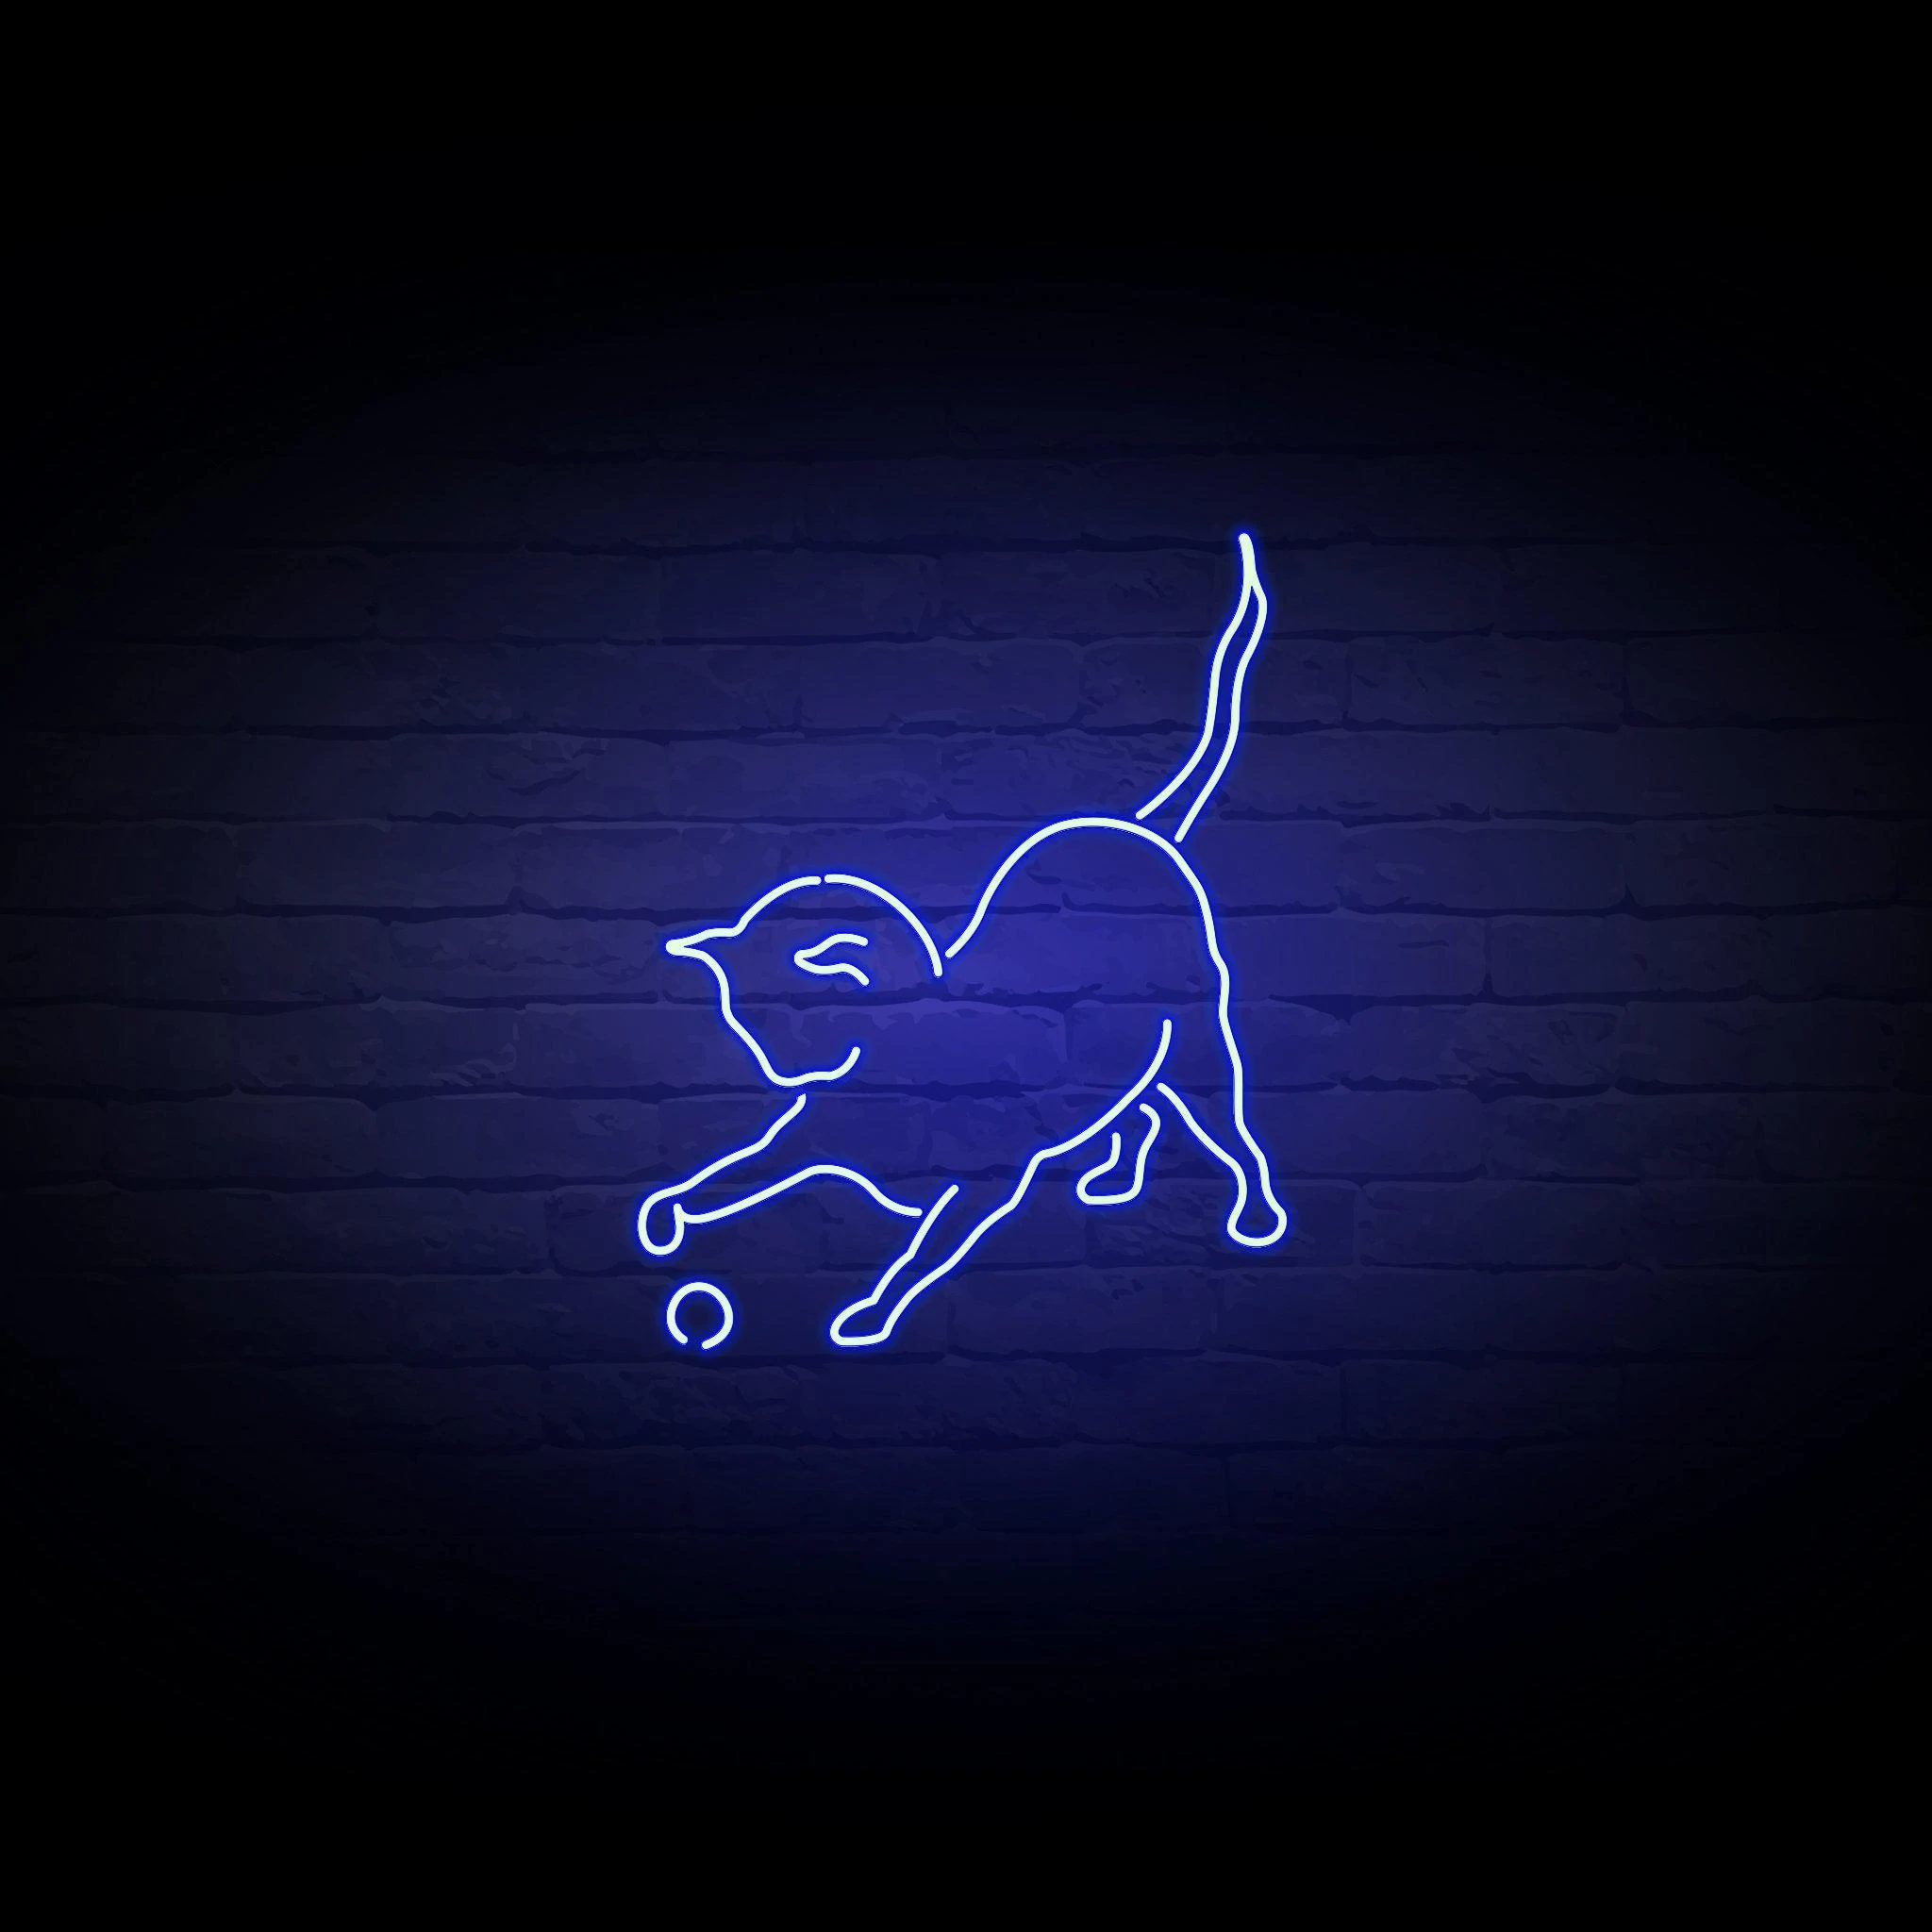 'CAT AND BALL' NEON SIGN - NeonFerry